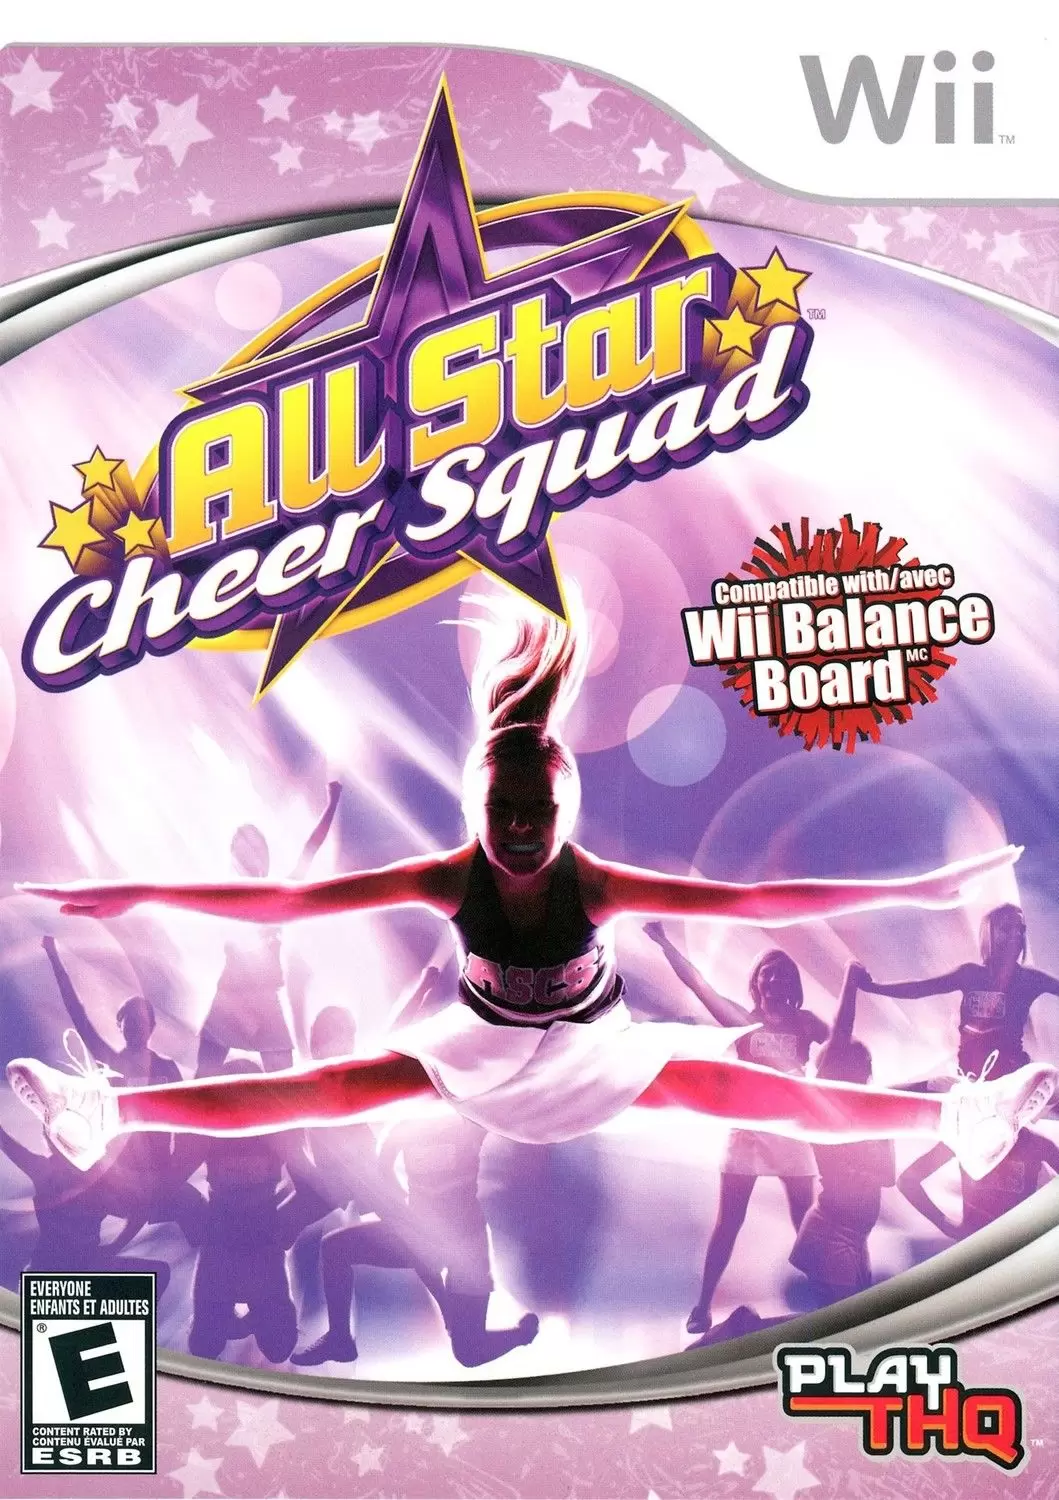 Nintendo Wii Games - All Star Cheer Squad